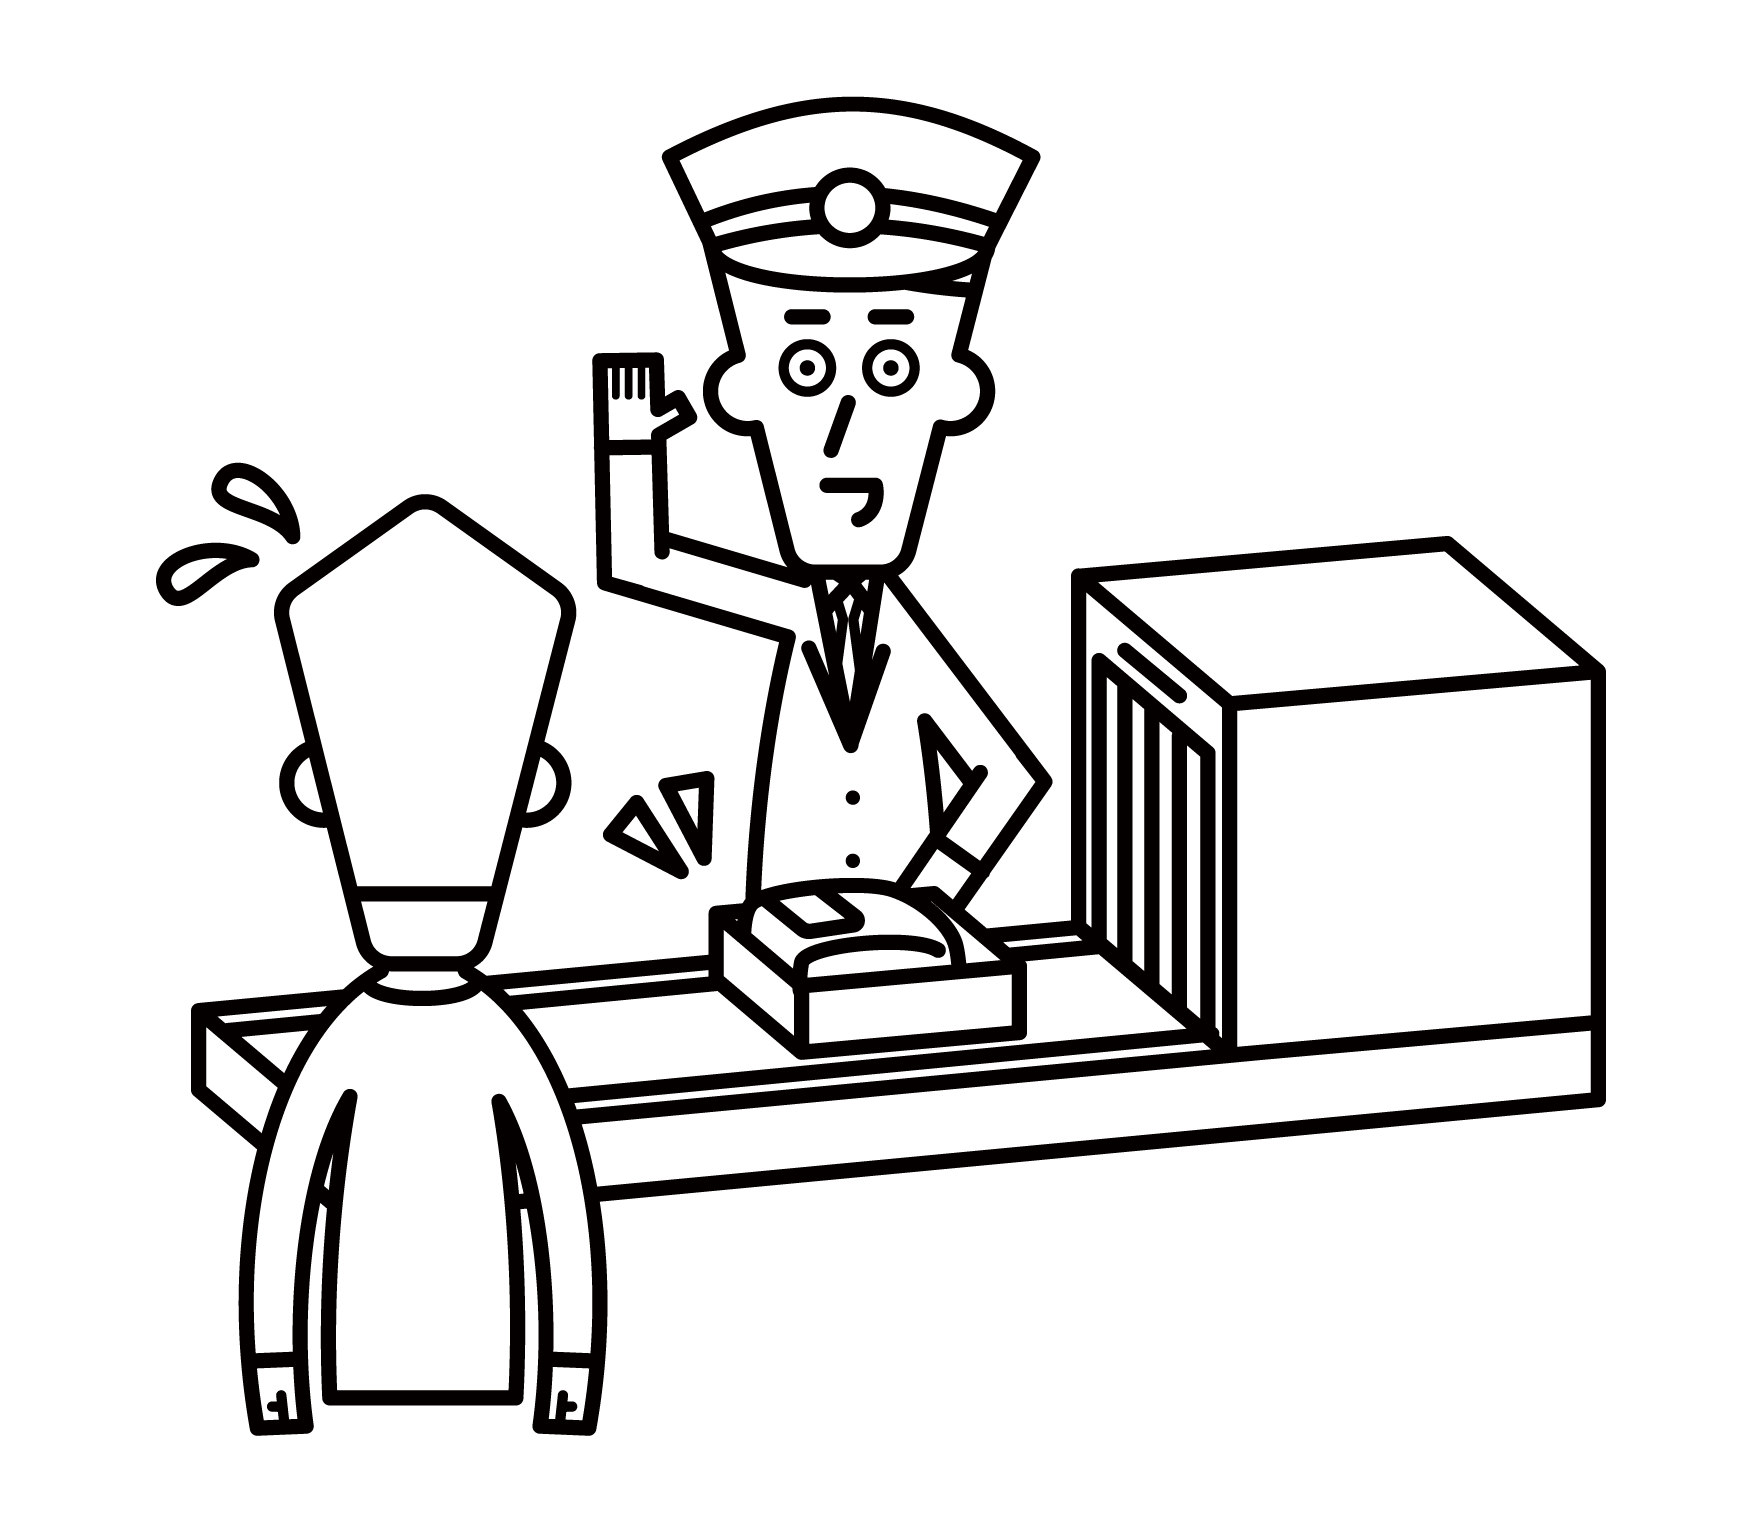 Illustration of a duty official (male) at the airport